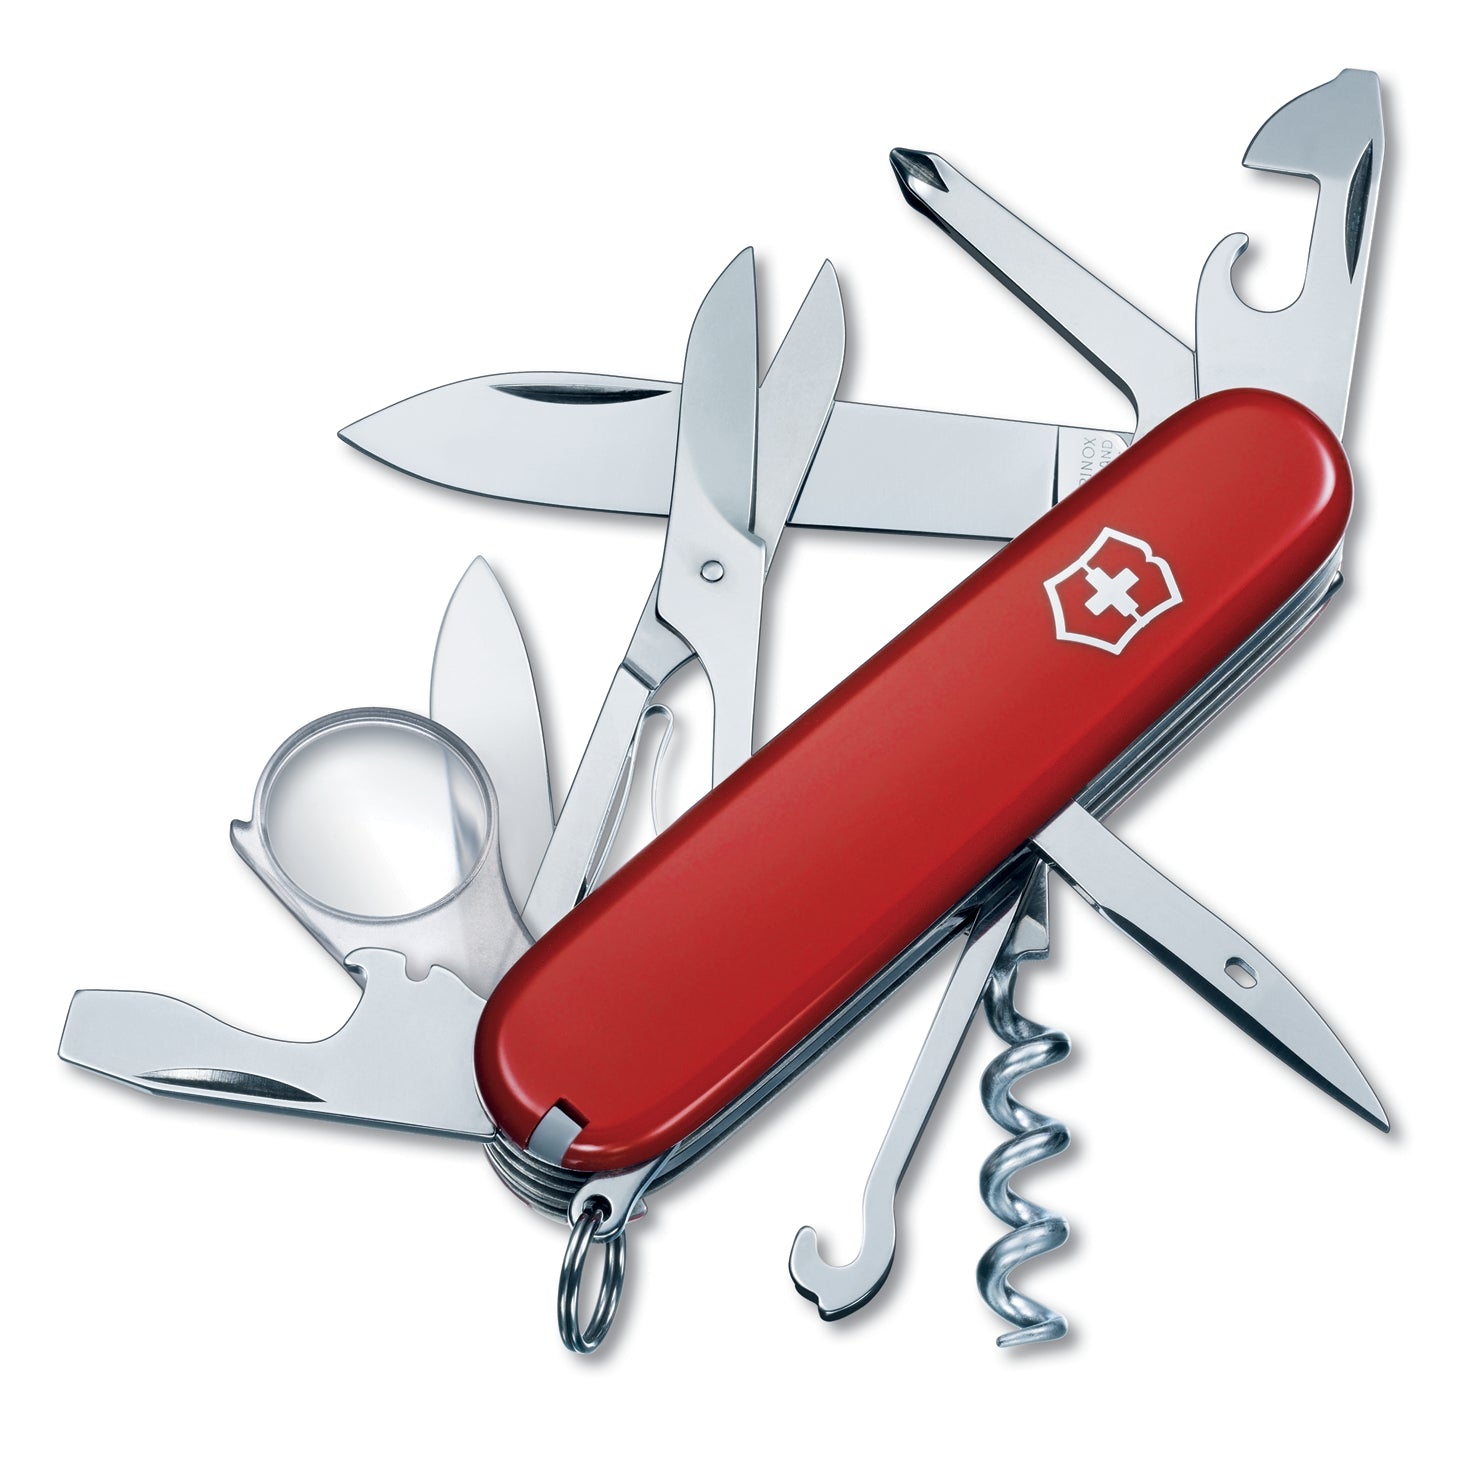 Victorinox Pocket Swiss Army Knife Sharpener Unboxing and Review